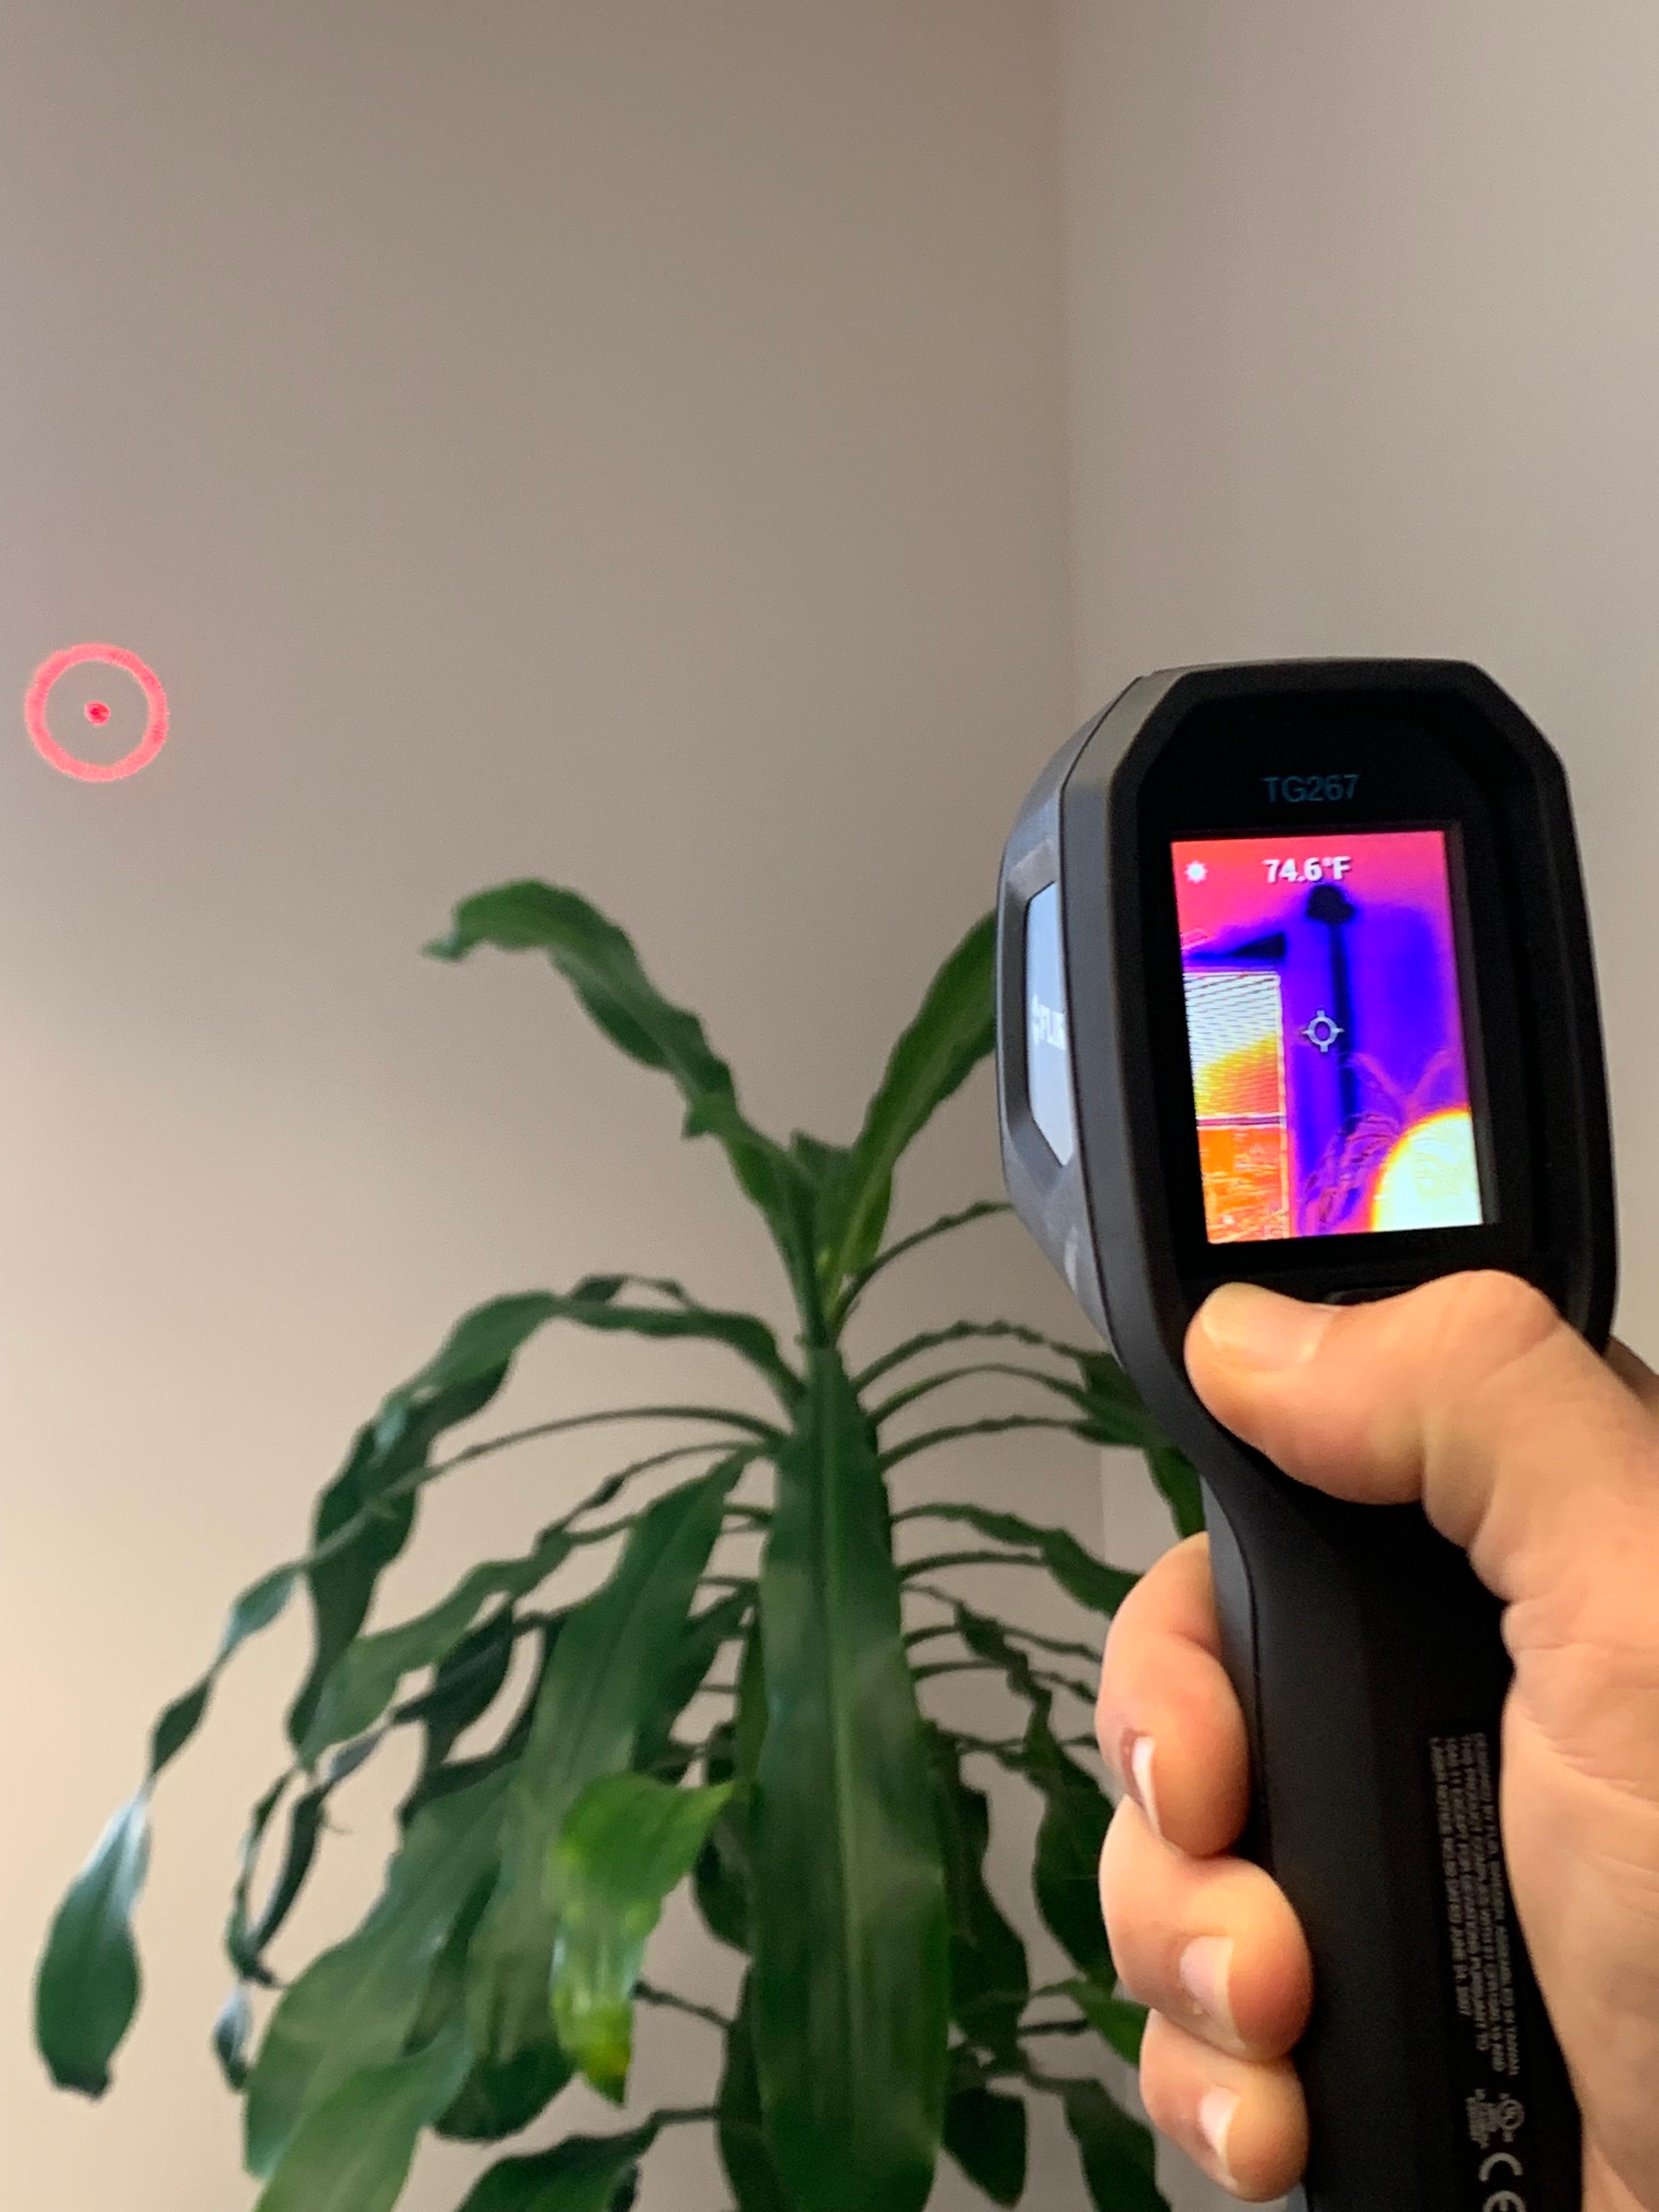 Water can sometimes hide behind things.  The SERVPRO team uses infrared detectors to find where the water-affected areas are to start the remediation process.